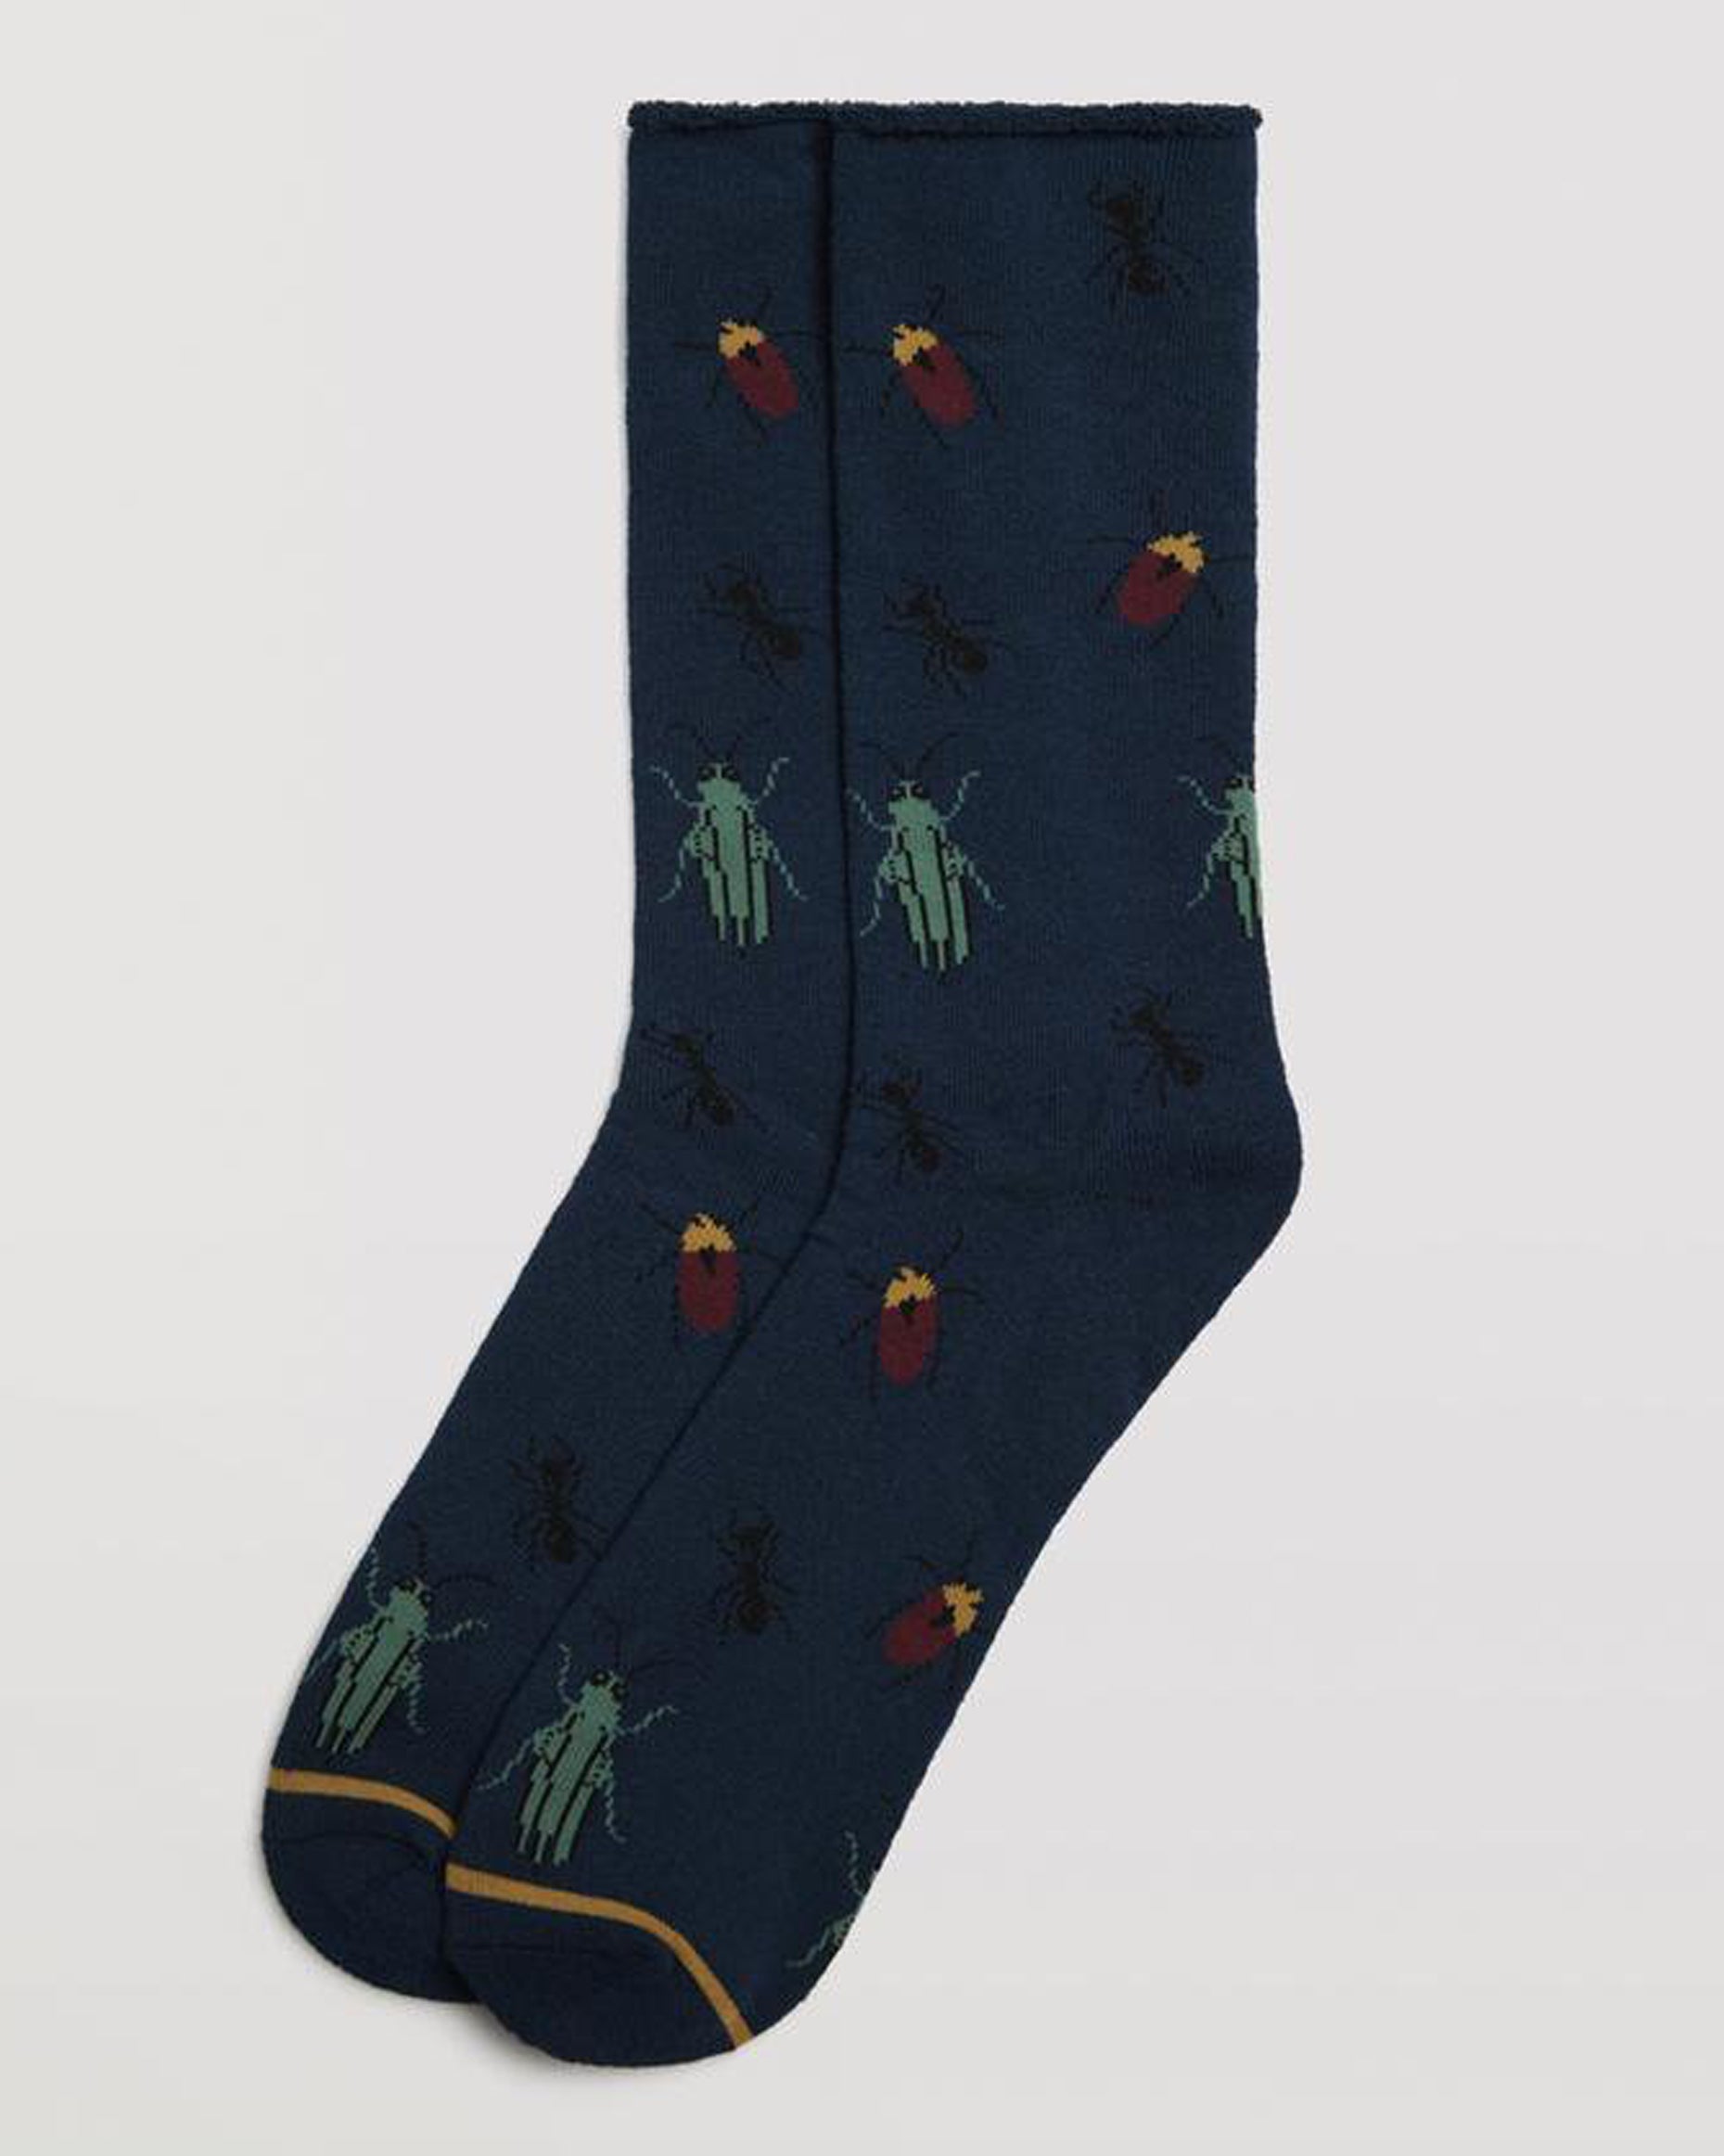 Ysabel Mora 22885 Insect Sock - Thick and warm navy terry lined thermal cotton no cuff ankle socks with an all over insect pattern in wine, sage green, mustard and black.